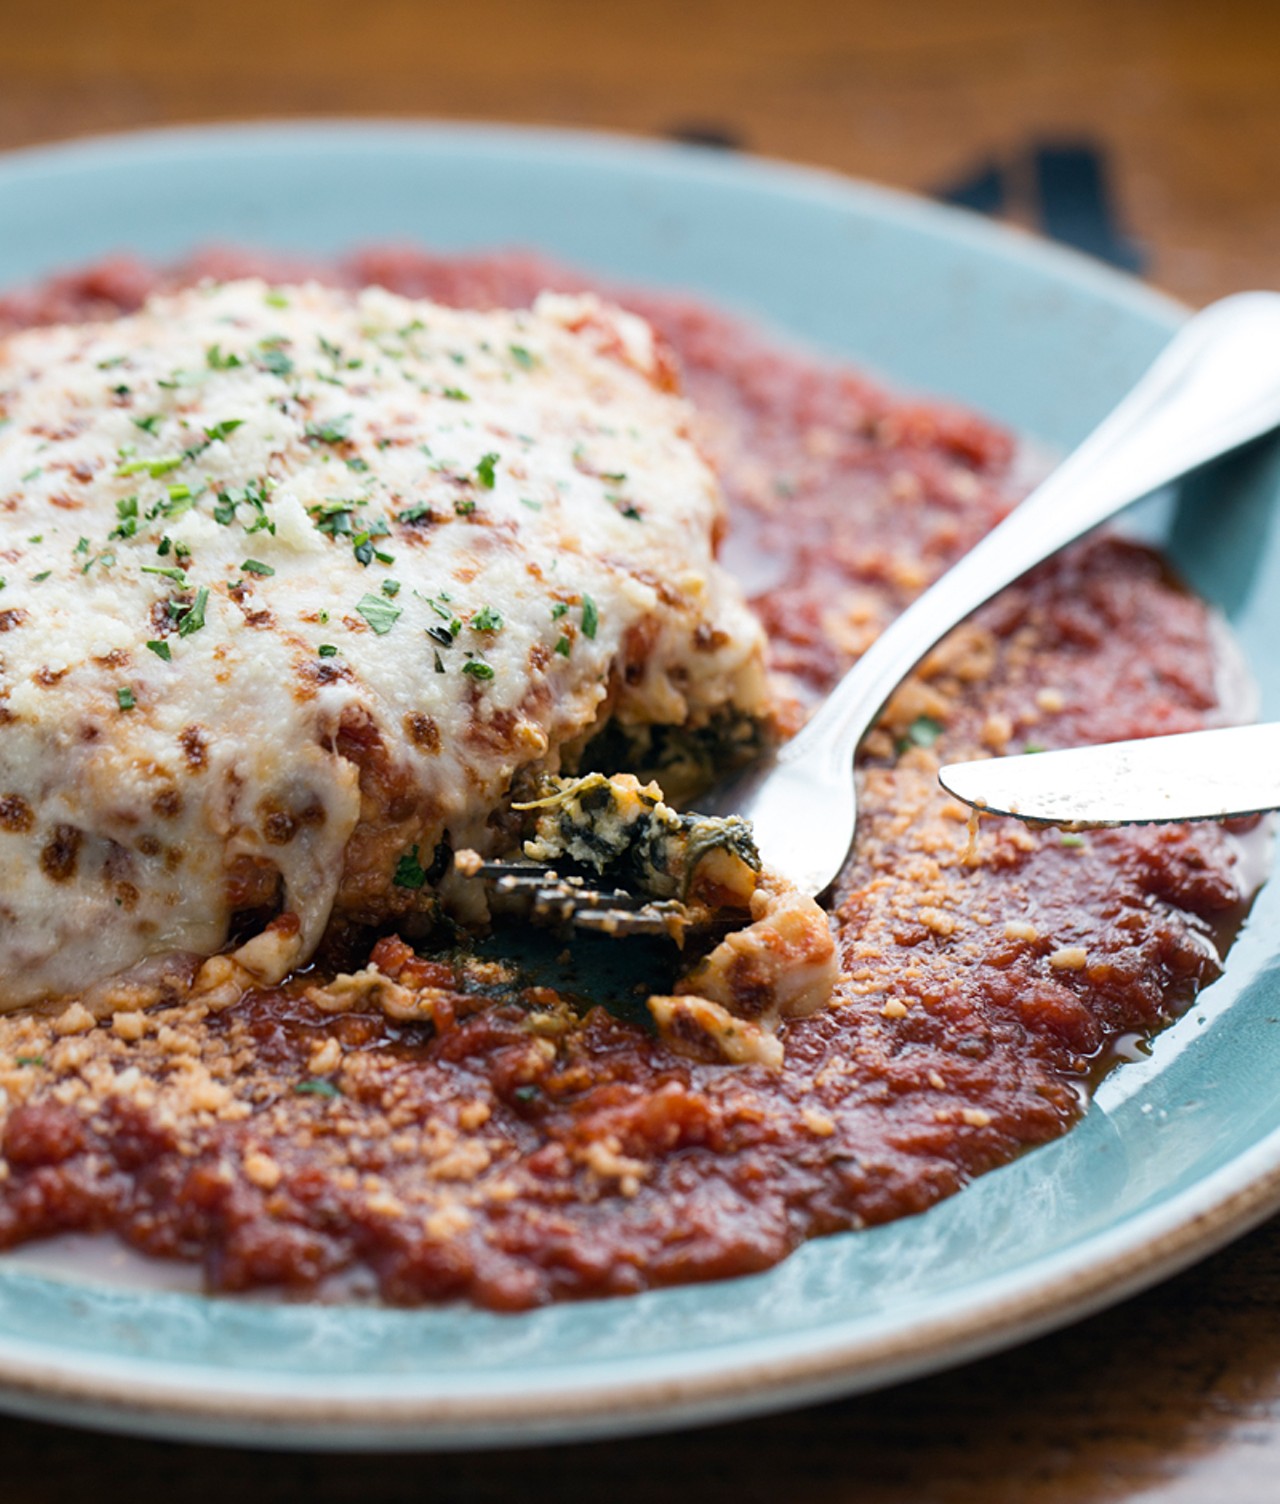 Billy's lasagna brings baked layers of noodles with house bolognese sauce, fresh spinach and parmesan cream blended with ricotta and mozzarella cheeses.